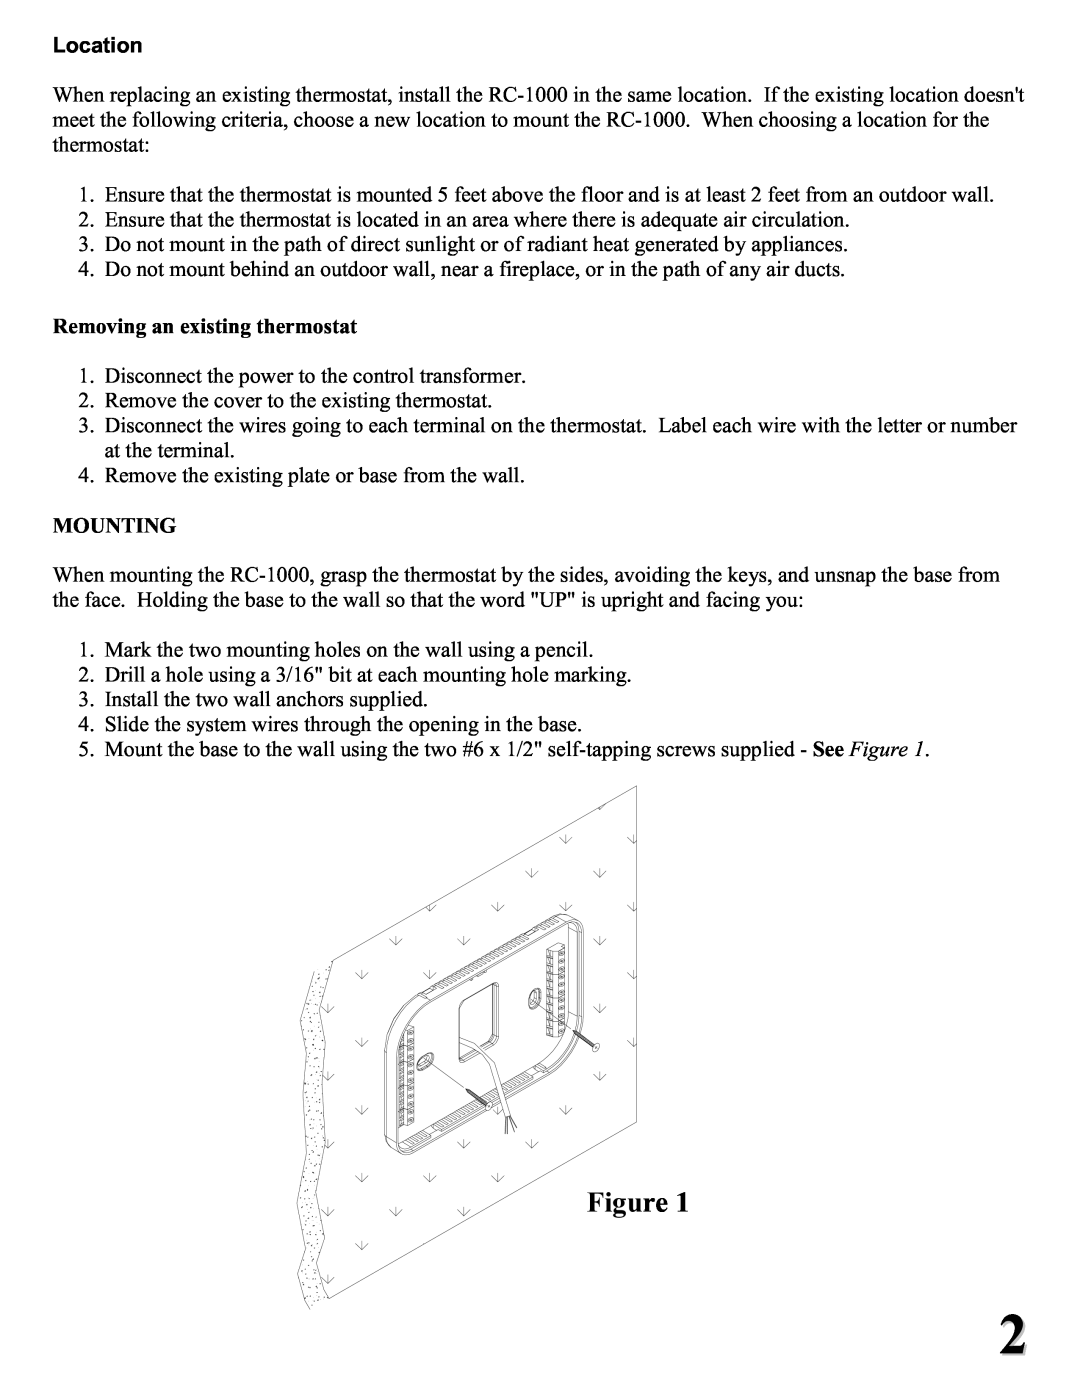 Home Automation RC-1000 installation instructions Location, Removing an existing thermostat, Mounting 